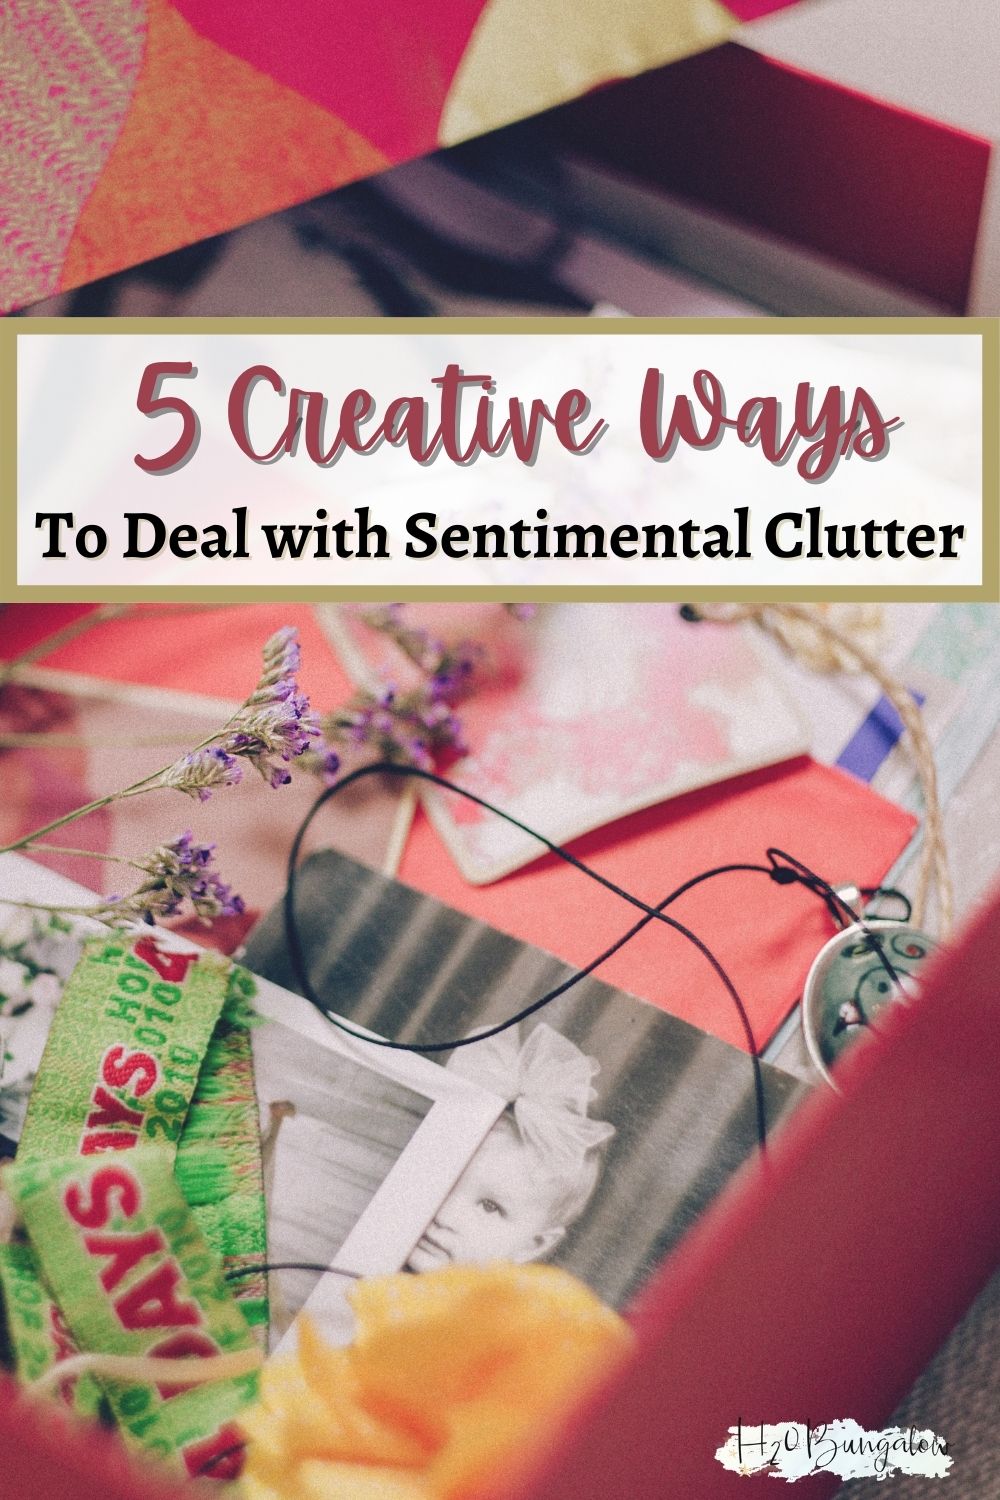 box of photos and keepsakes with text 5 Creative Ways to Deal with Sentimental Clutter